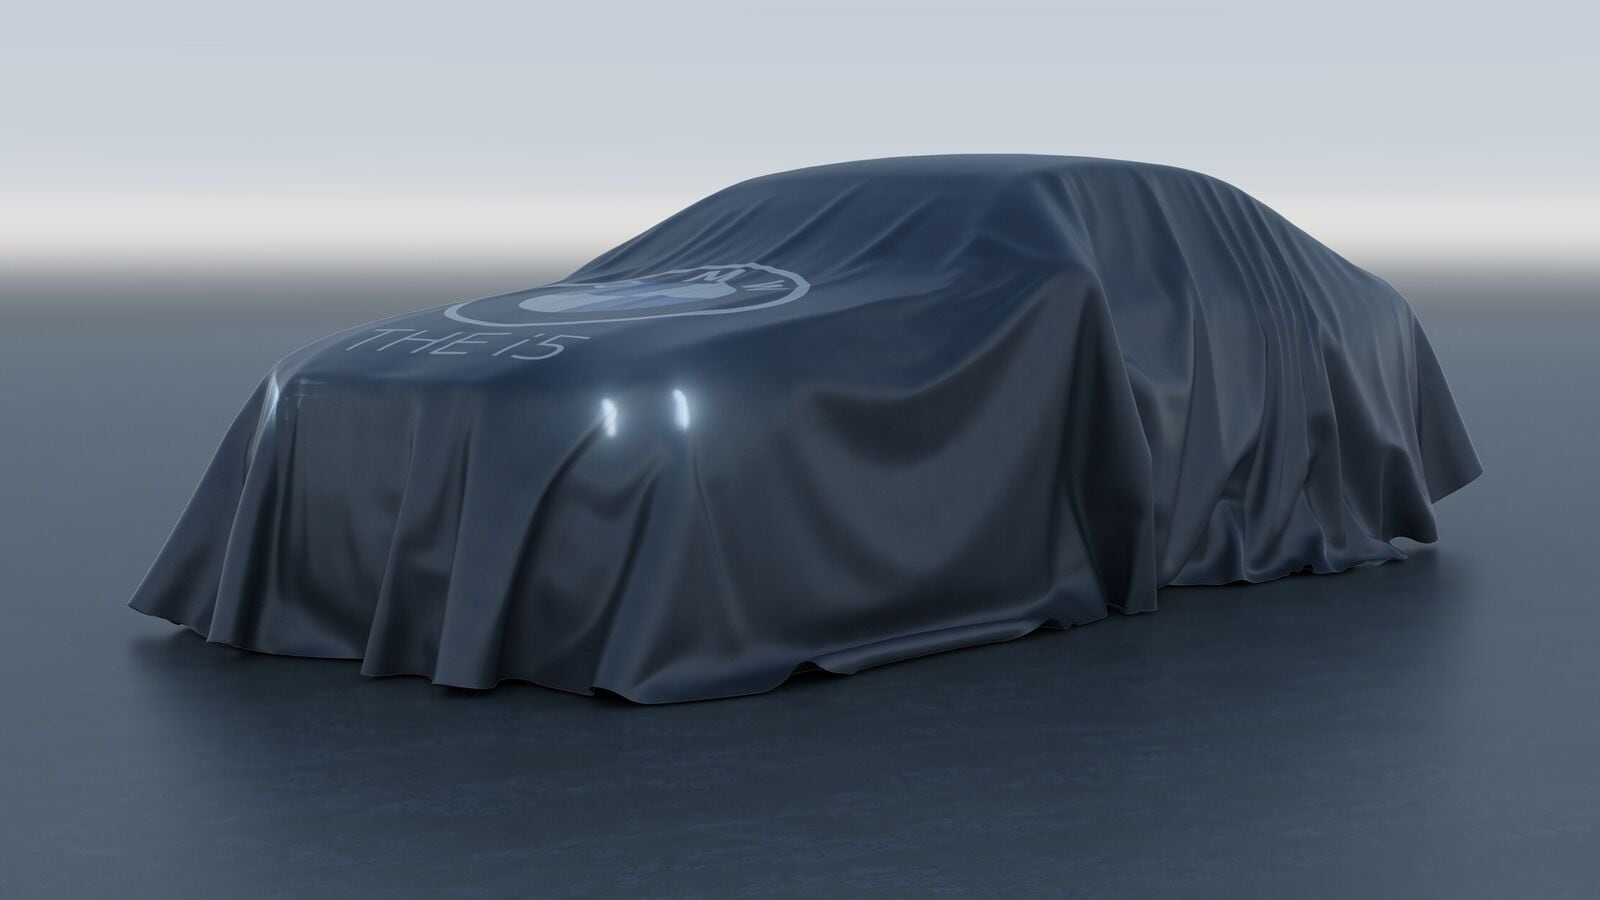 India-bound 8th gen BMW 5 Series teased, will be joined by the all-electric i5